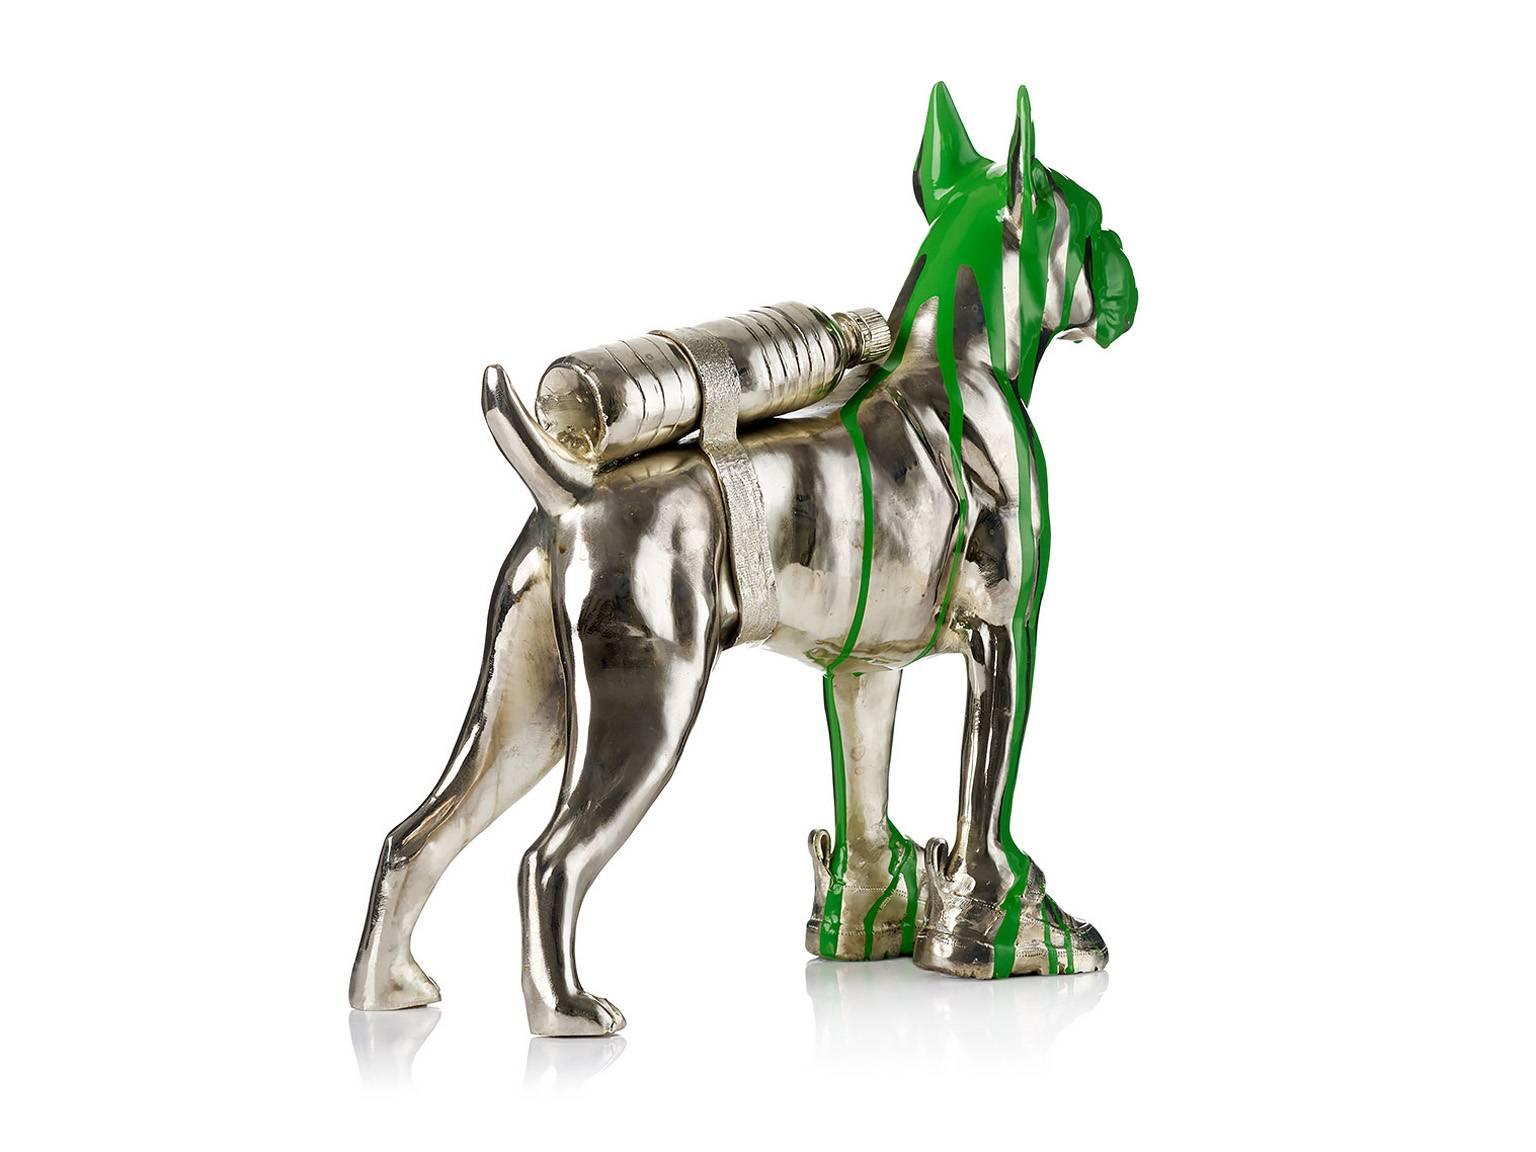 Cloned Bulldog with pet bottle - Gold Figurative Sculpture by William Sweetlove